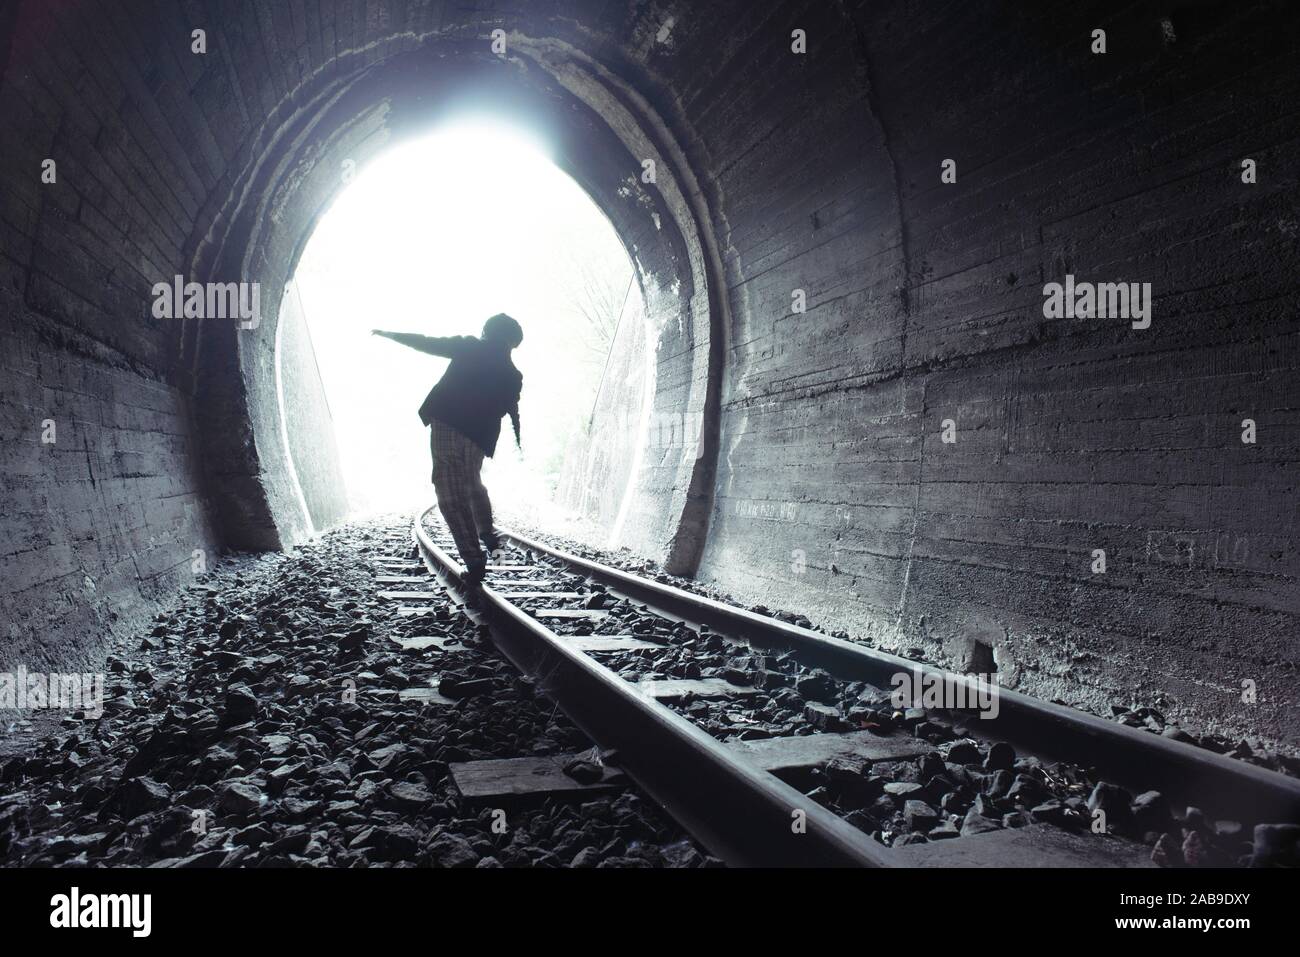 Child walking in railway tunnel. Vintage clothes. Stock Photo